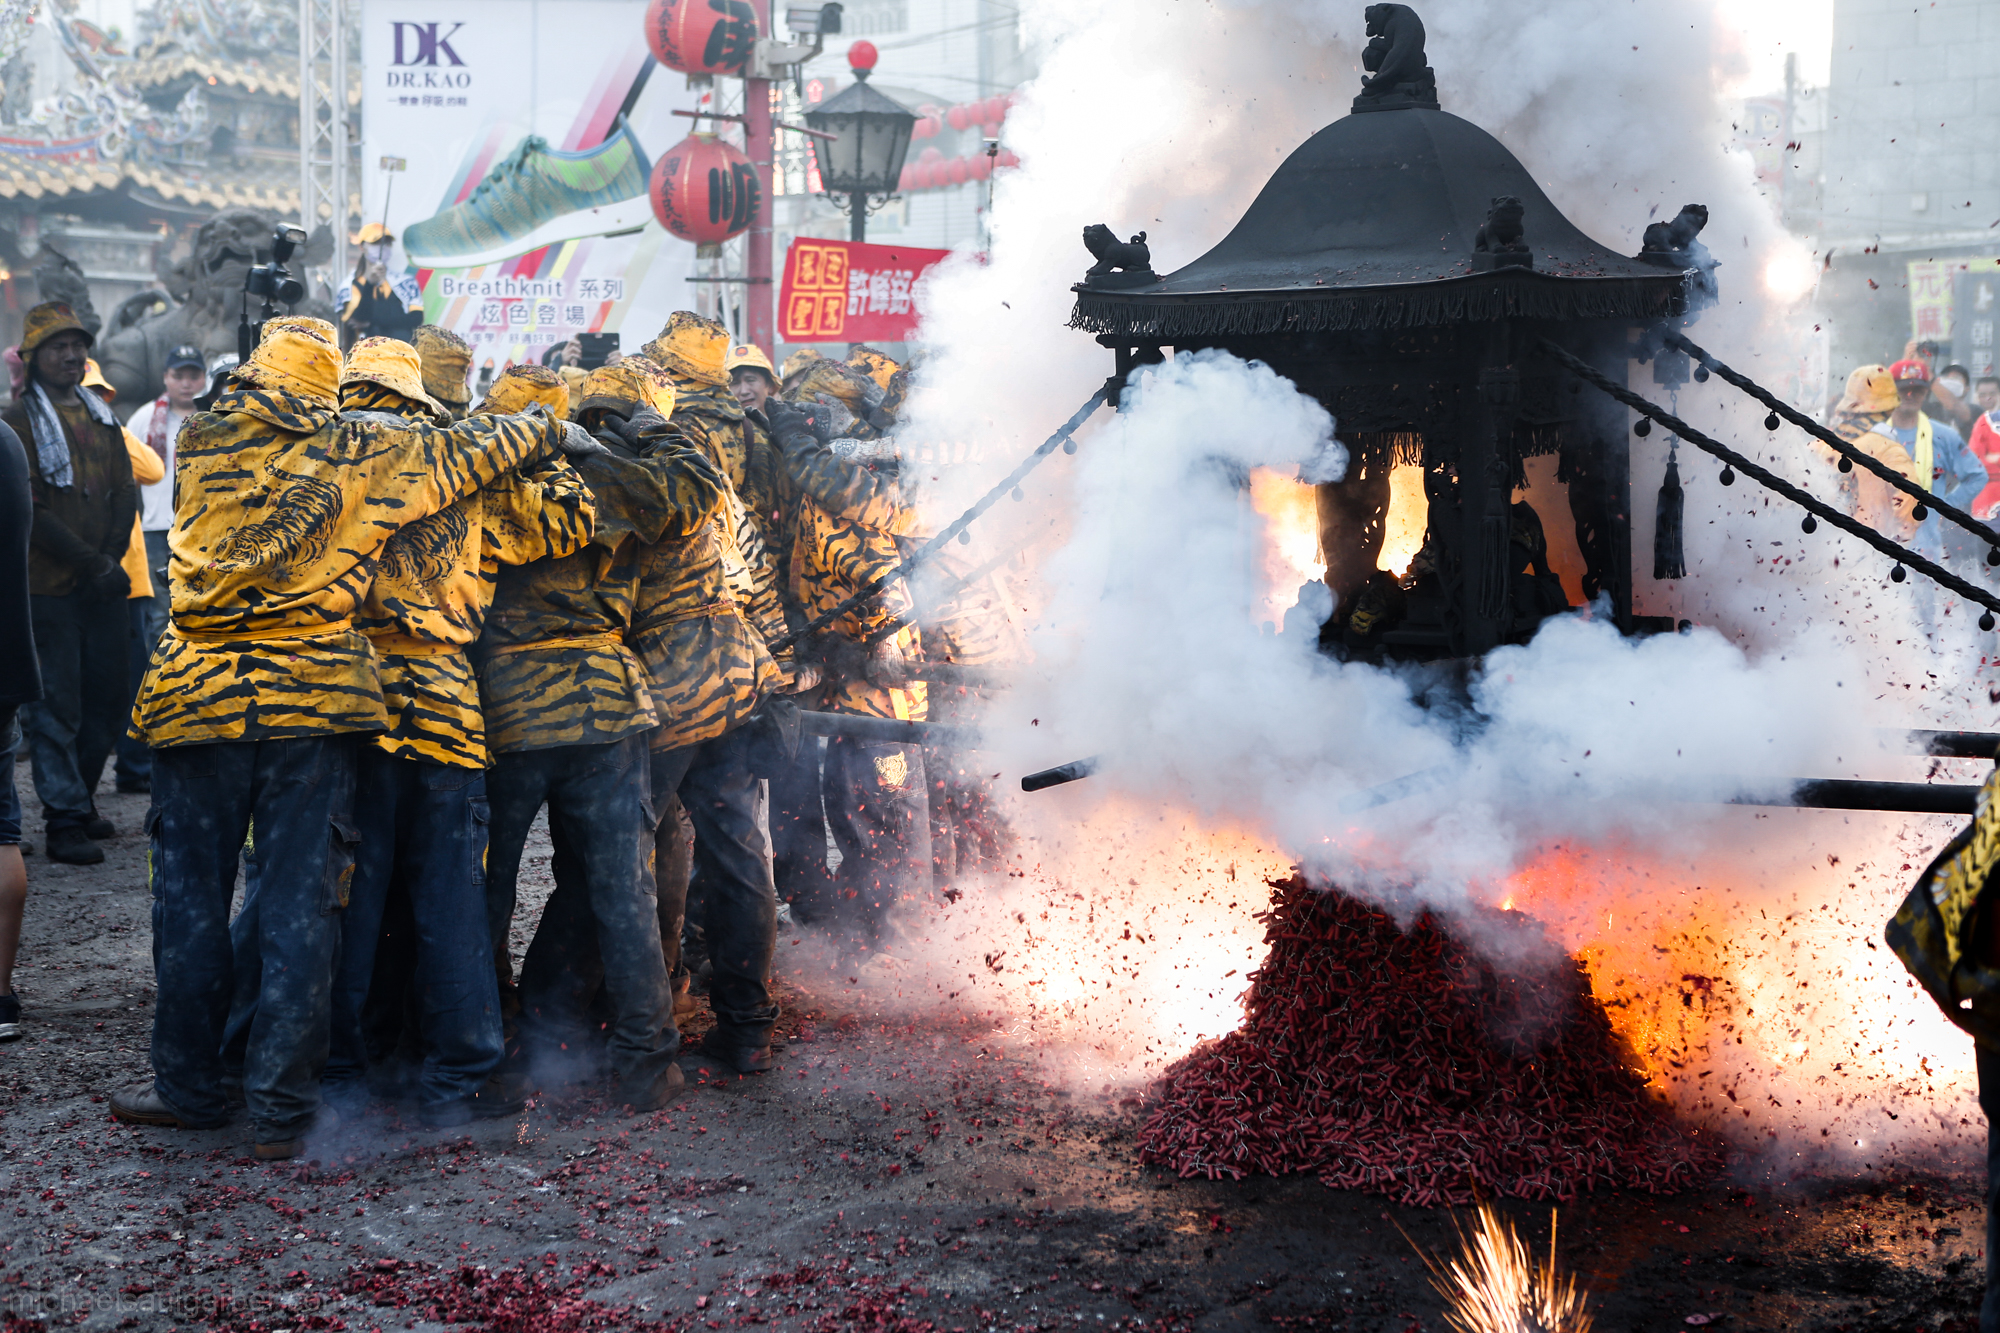 Bombarding the gods with fireworks, Beigang Chaotian Temple, 2017